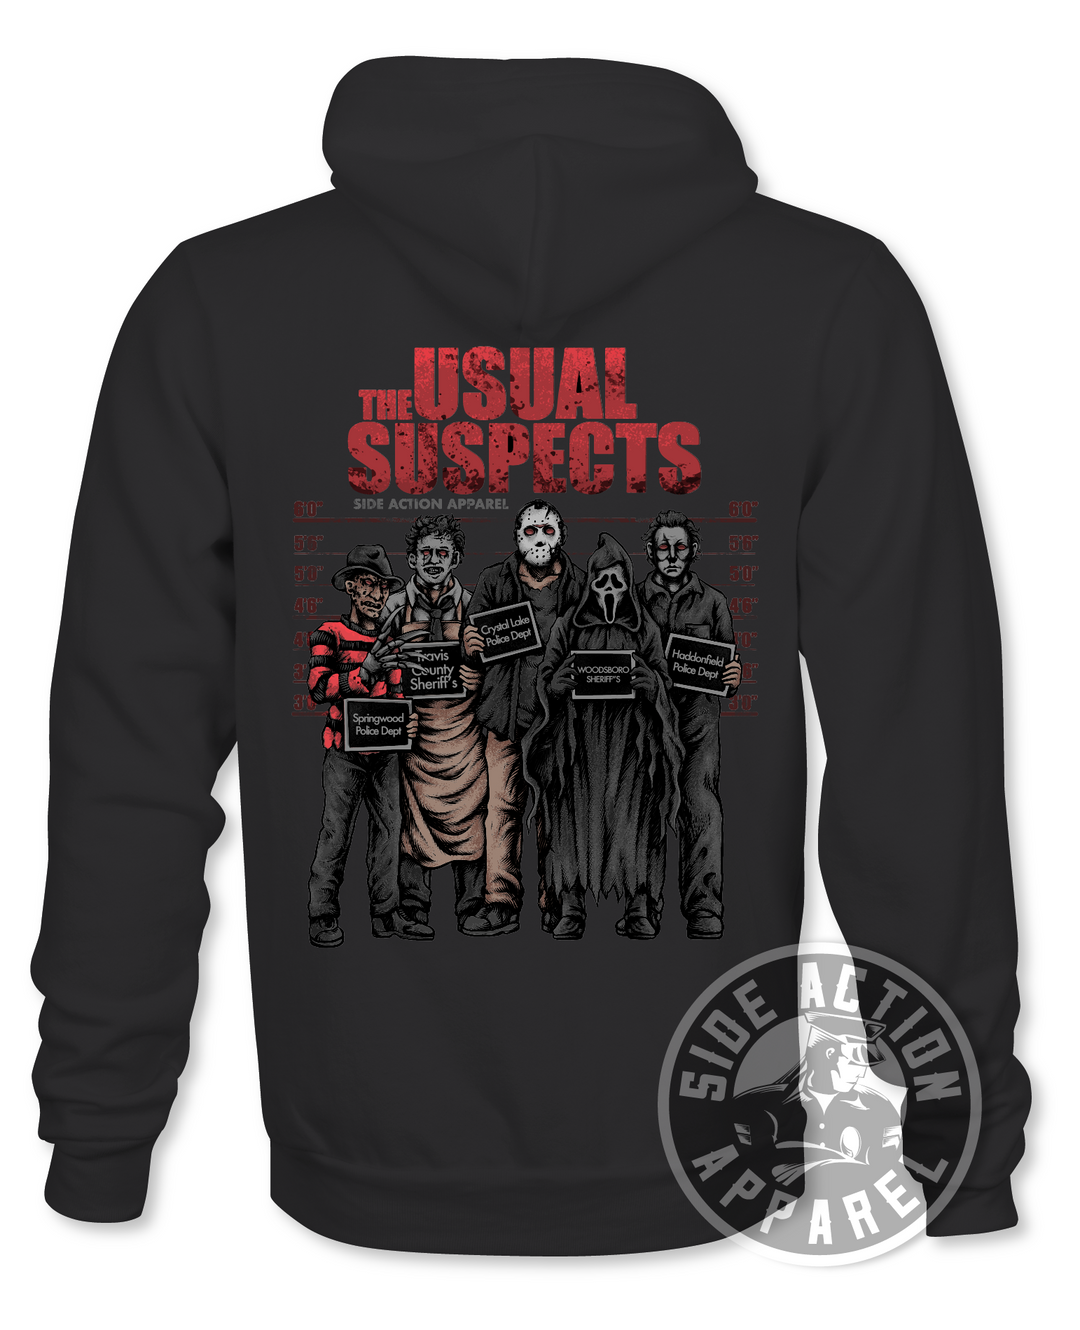 Hoodie - The Usual Suspects